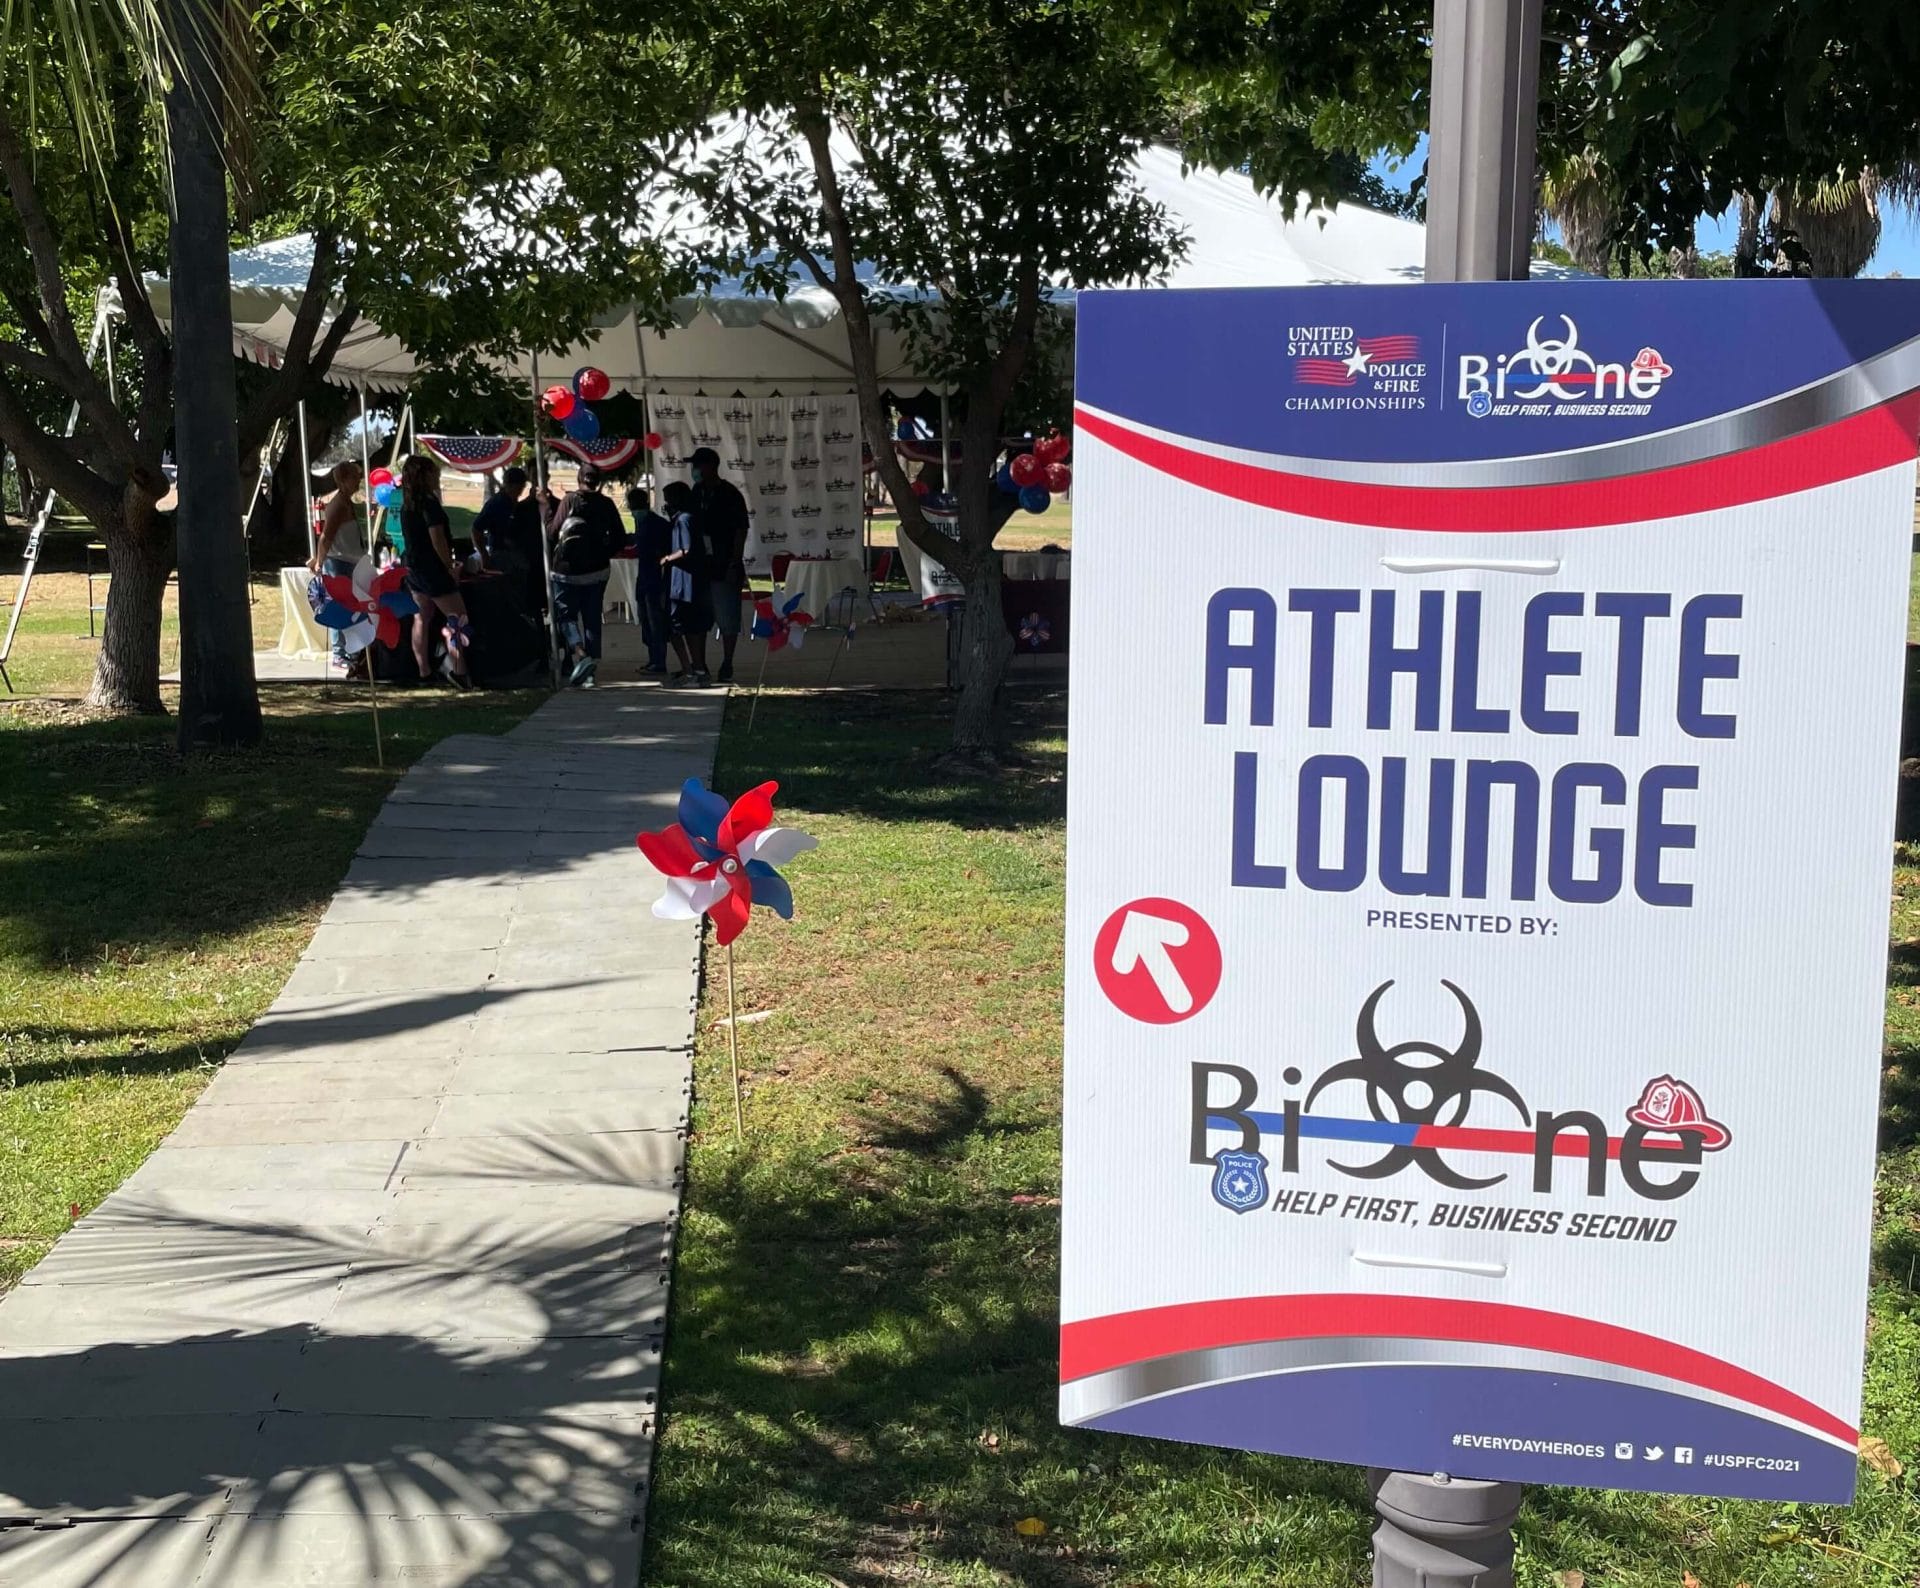 Bio-One Booth and Athlete Lounge at the United States Police and Fire Championships